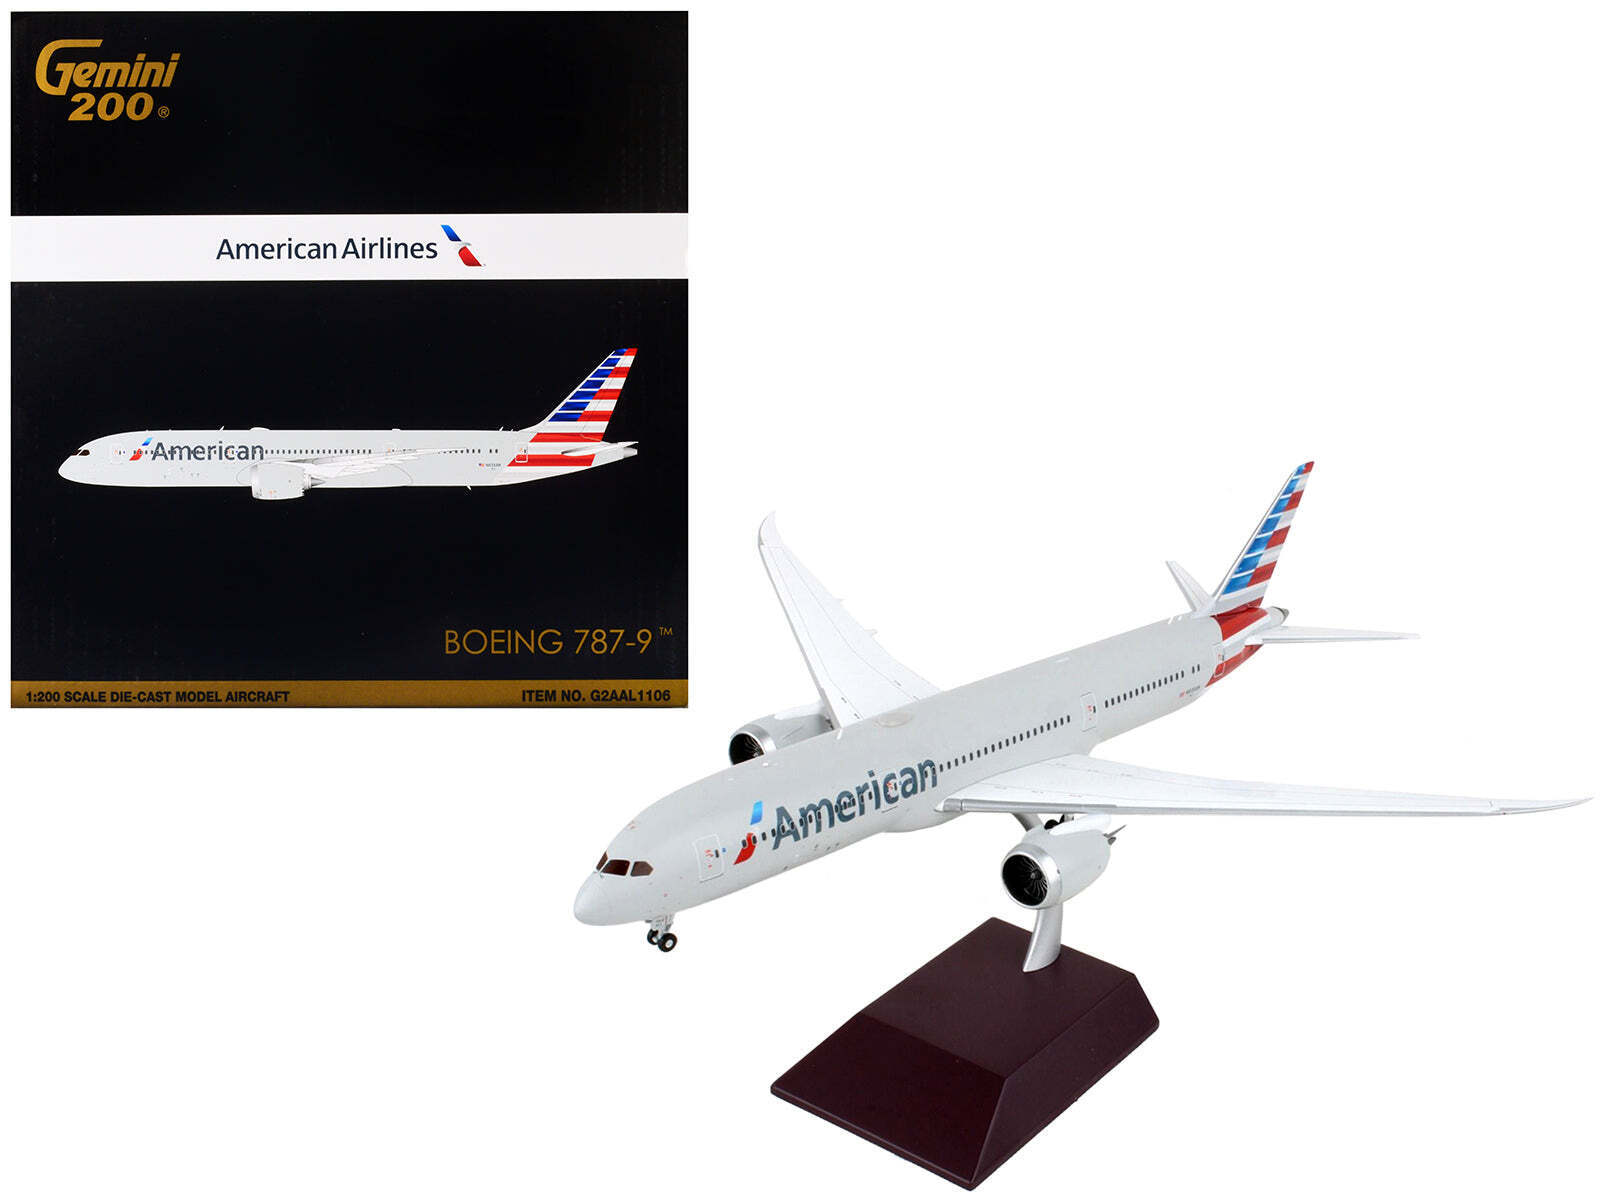 Boeing 787- Commercial Airlines Gemini 200 1/200 Diecast Model Airplane